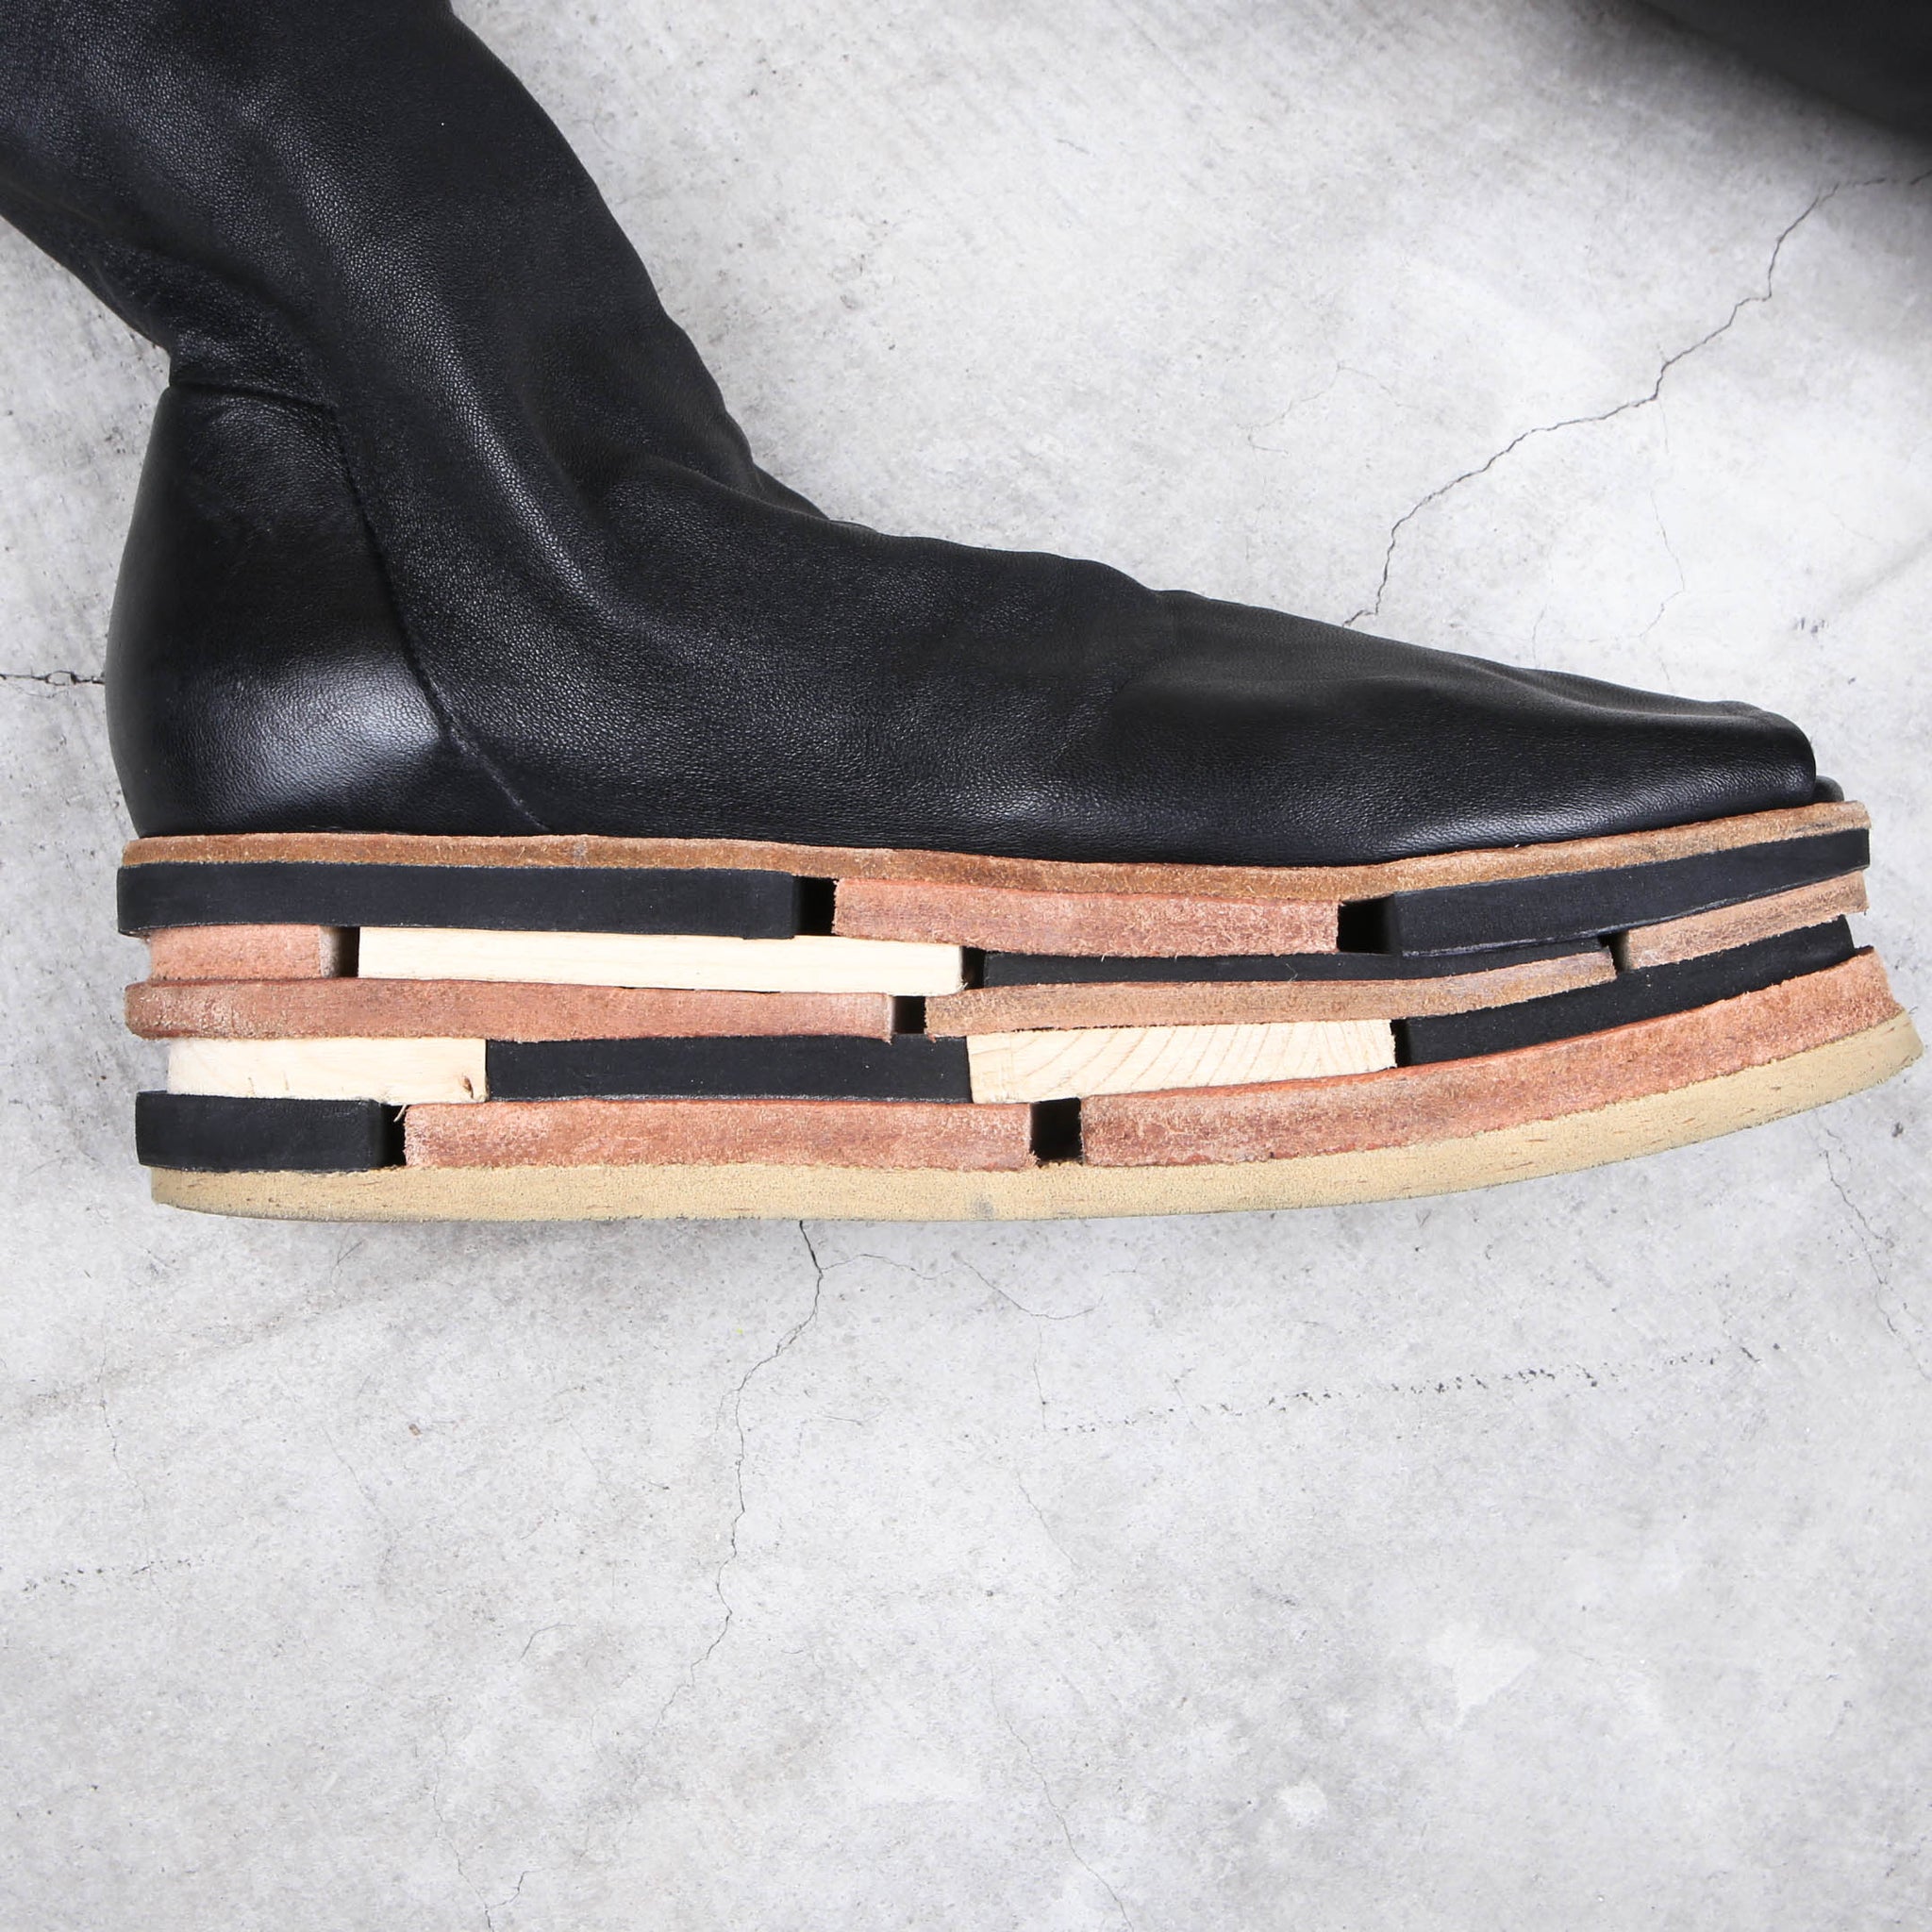 Rick Owens AW/17 Lego Sock Boot